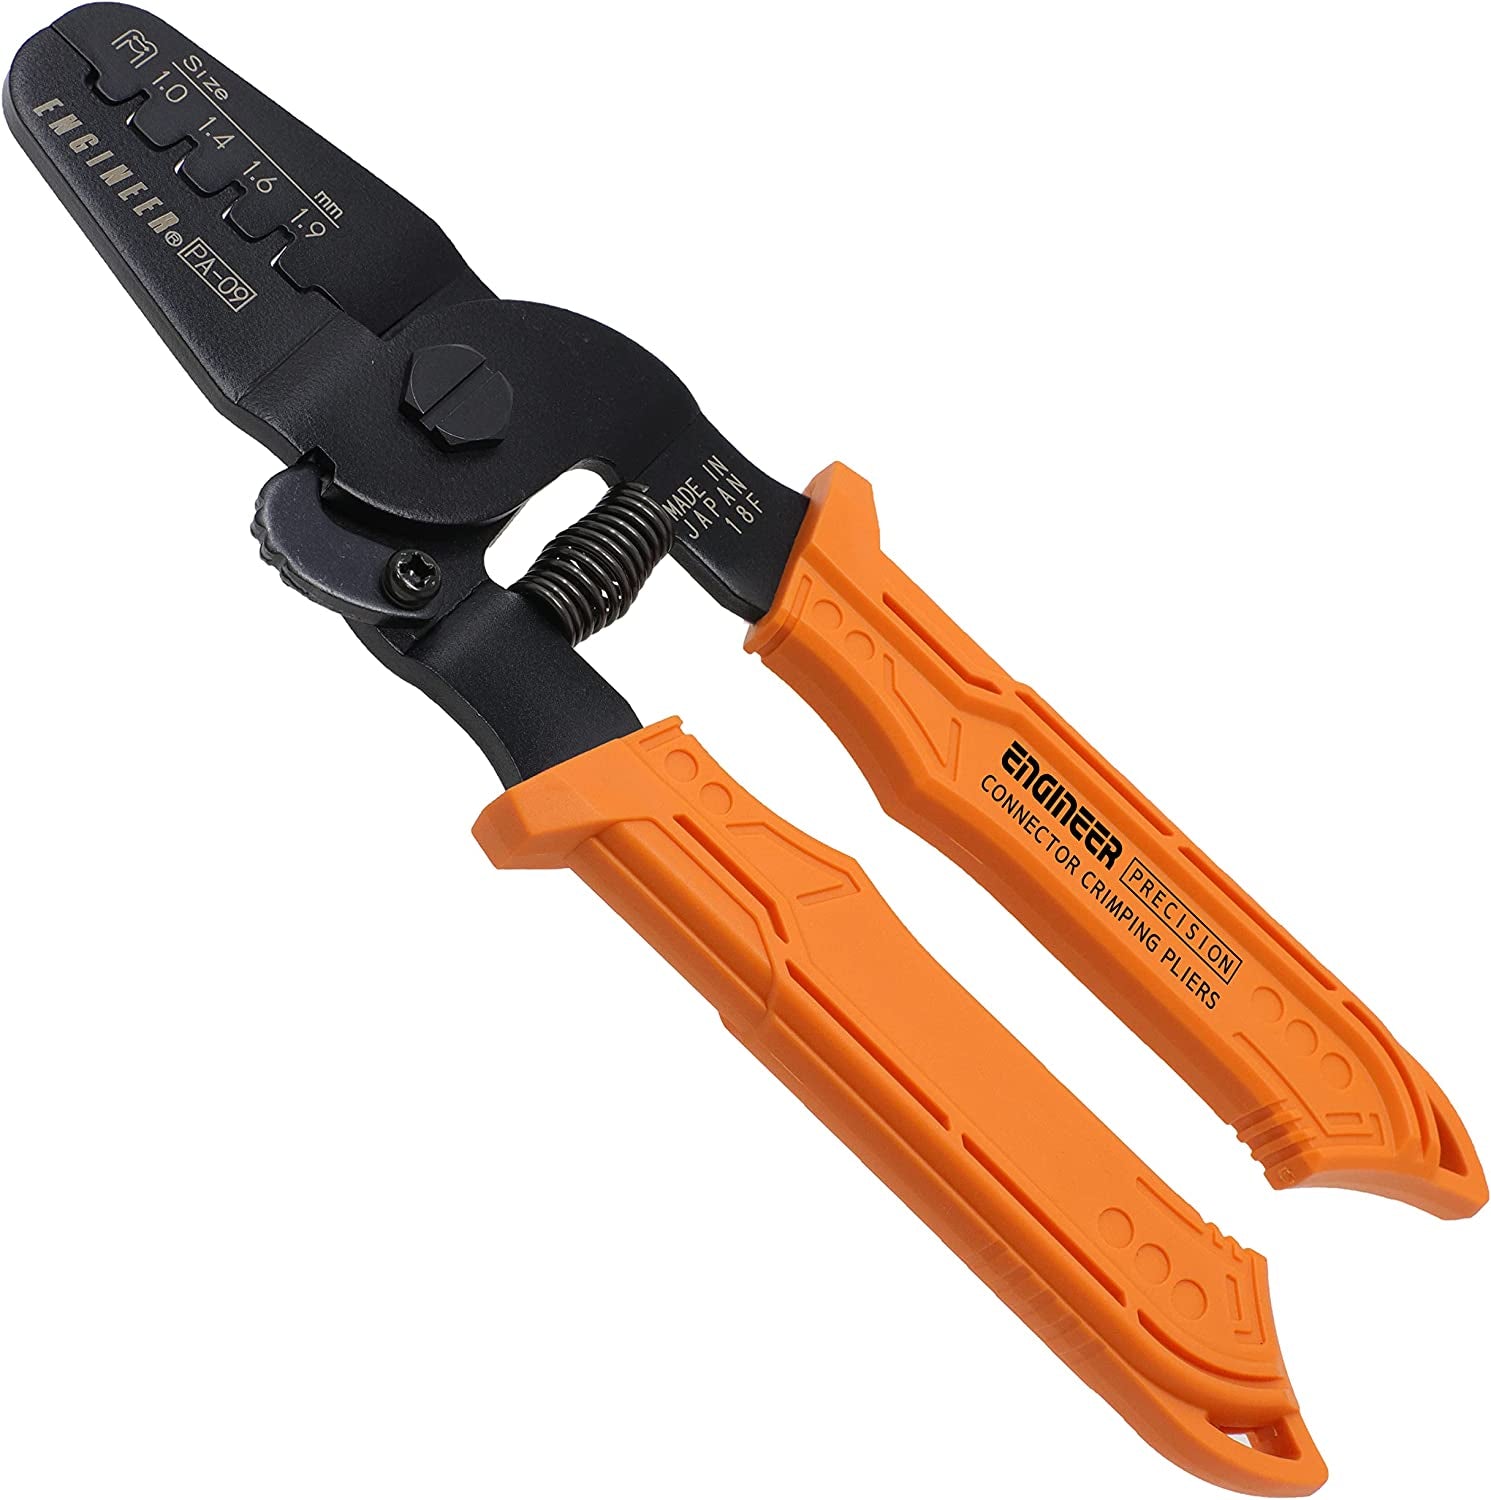 ENGINEER, ENGINEER PA-09 Super-Precise Crimping Tool (Made in Japan) Works with AWG32-20 Open-Barrel JST ZH, PH, XH, SH/SHL, Molex KK, Picoblade and Other Narrow-Pitch Connector Contacts